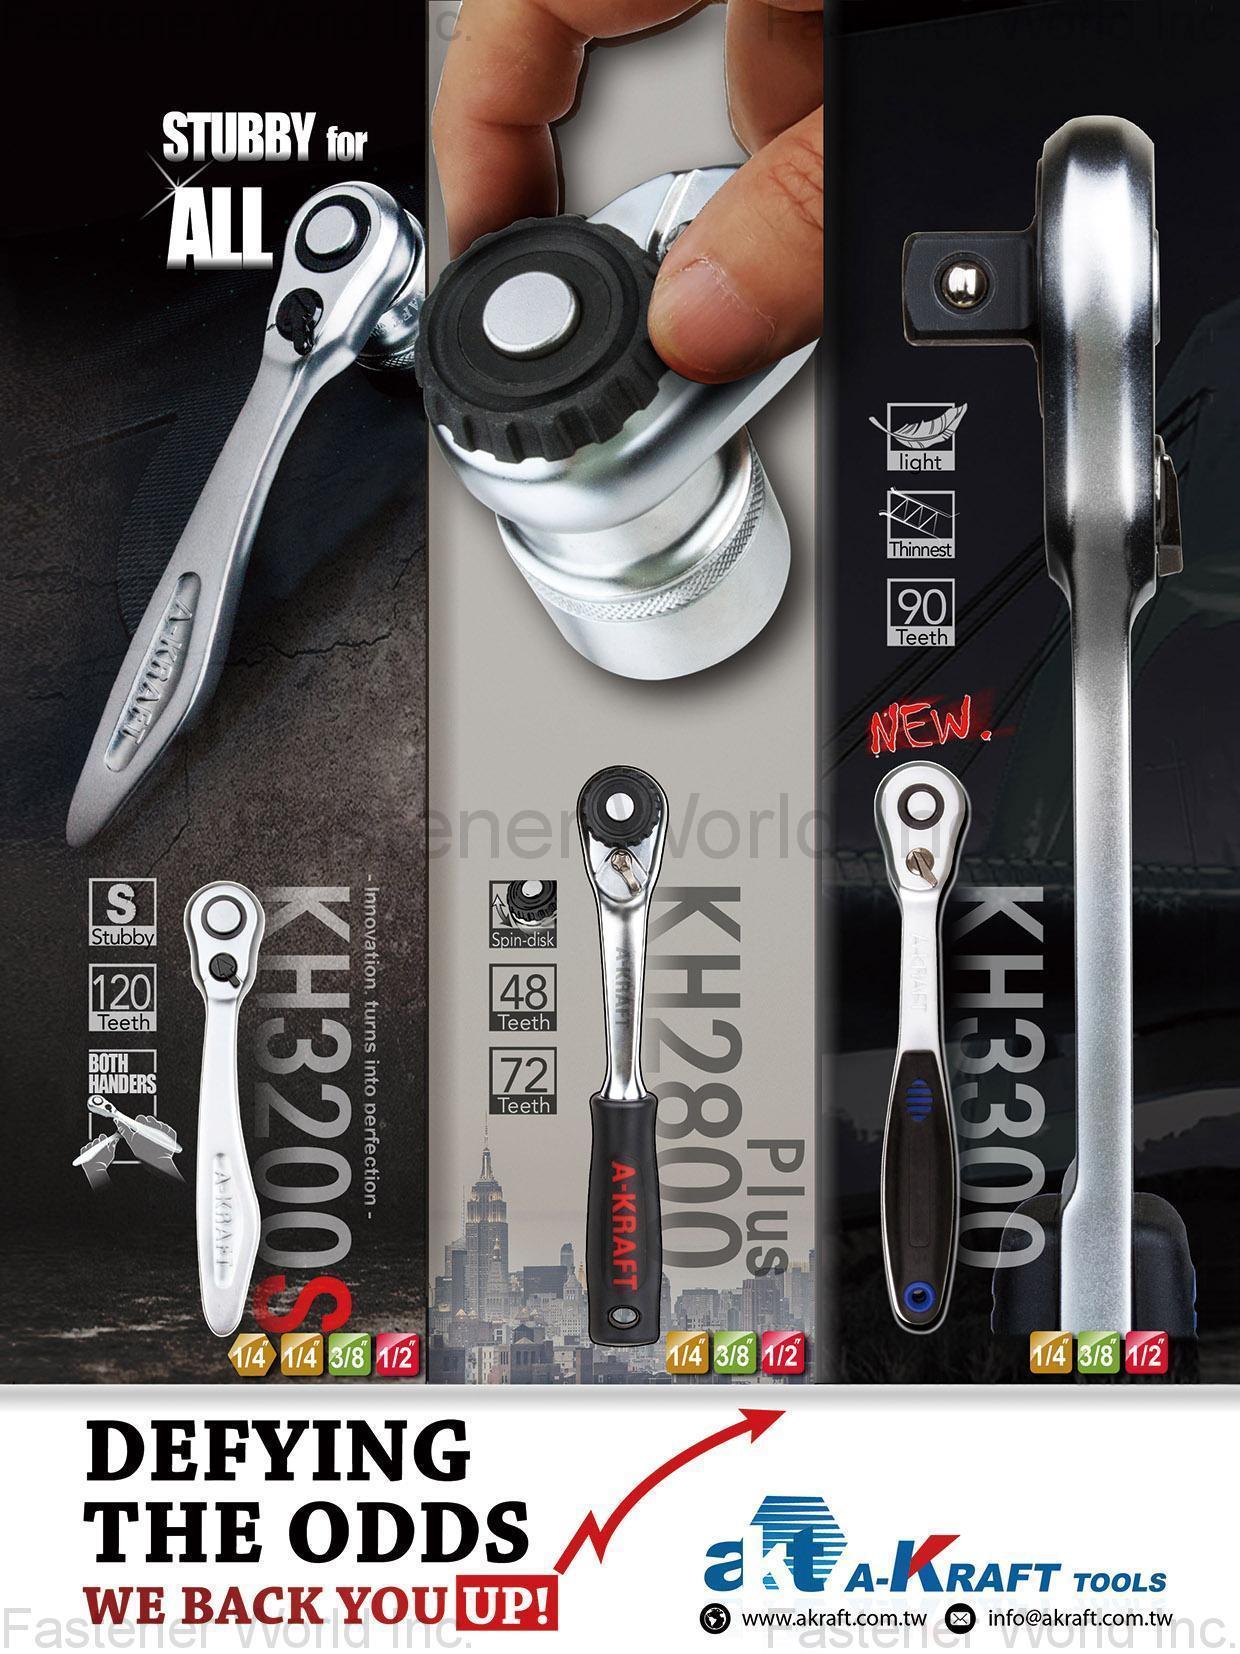 A-KRAFT TOOLS MANUFACTURING CO., LTD. , Sockets, Accessories, Ratchets, Socket Sets, Impact, Wrenches, Screwdrivers Pliers, Insulated Pliers & Screwdrivers, Tool Cabinets, Sockets & Tools Storages, Giveaways